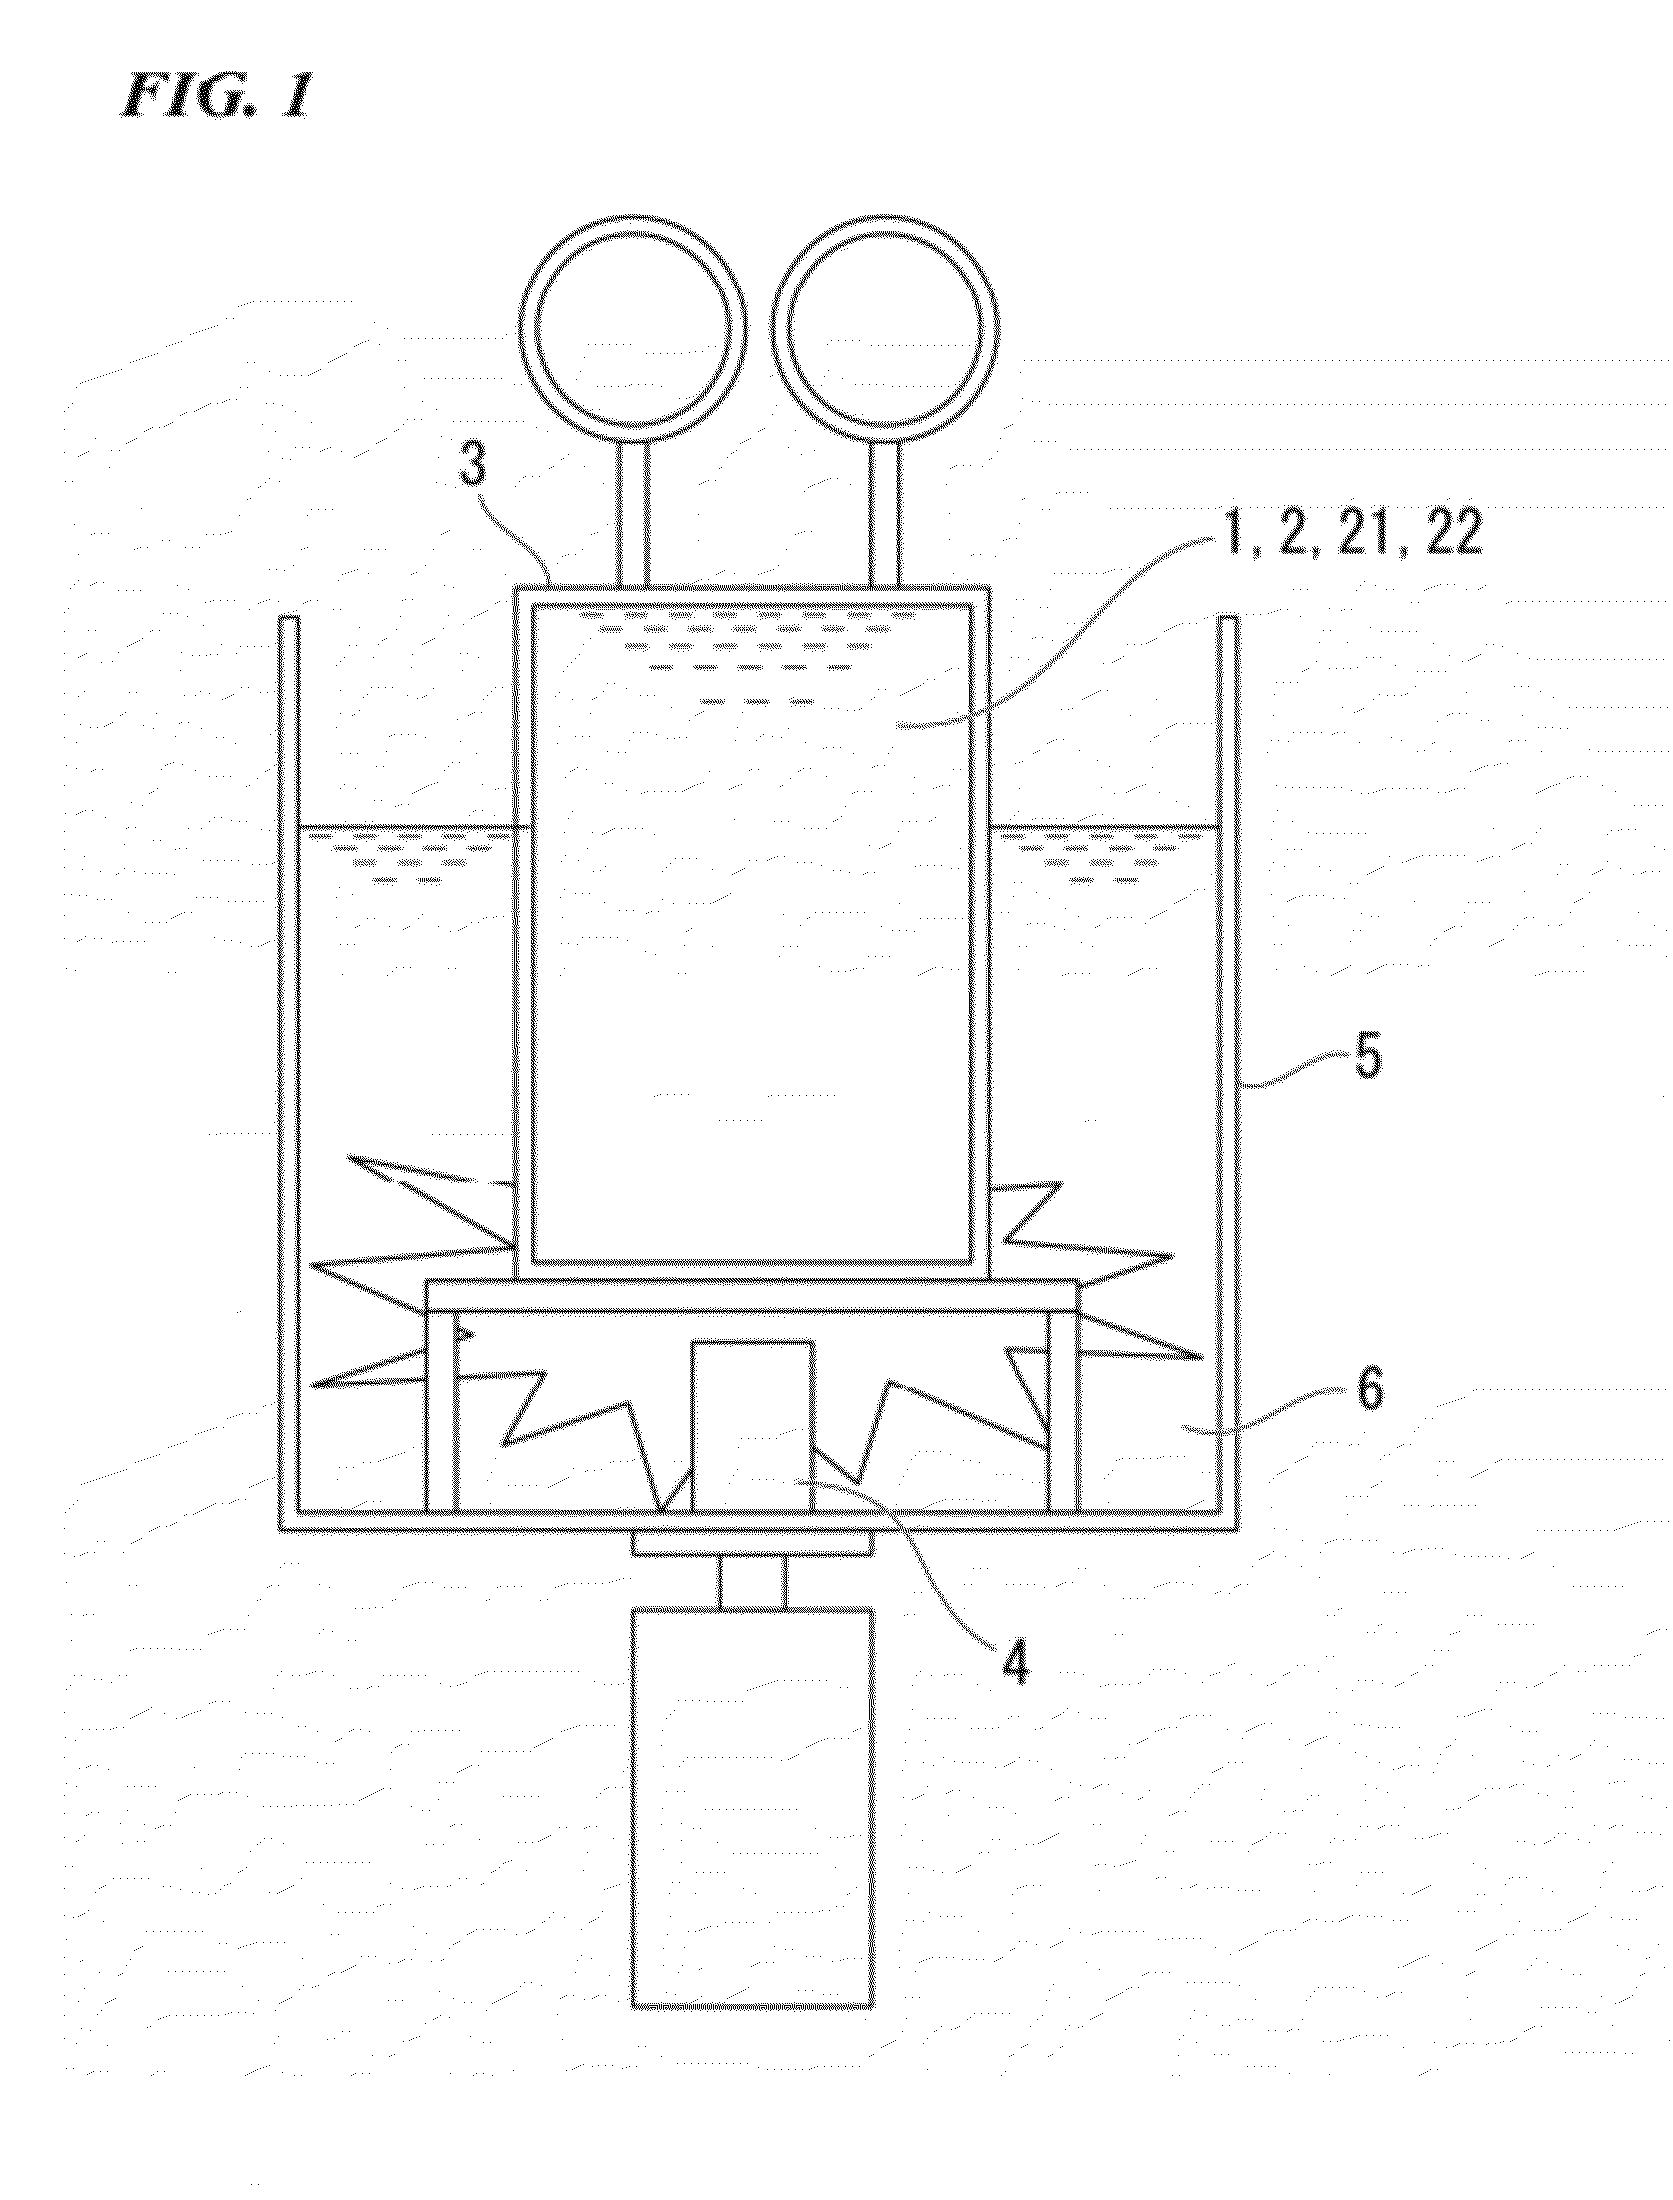 Composite resinous material particles and process for producing same